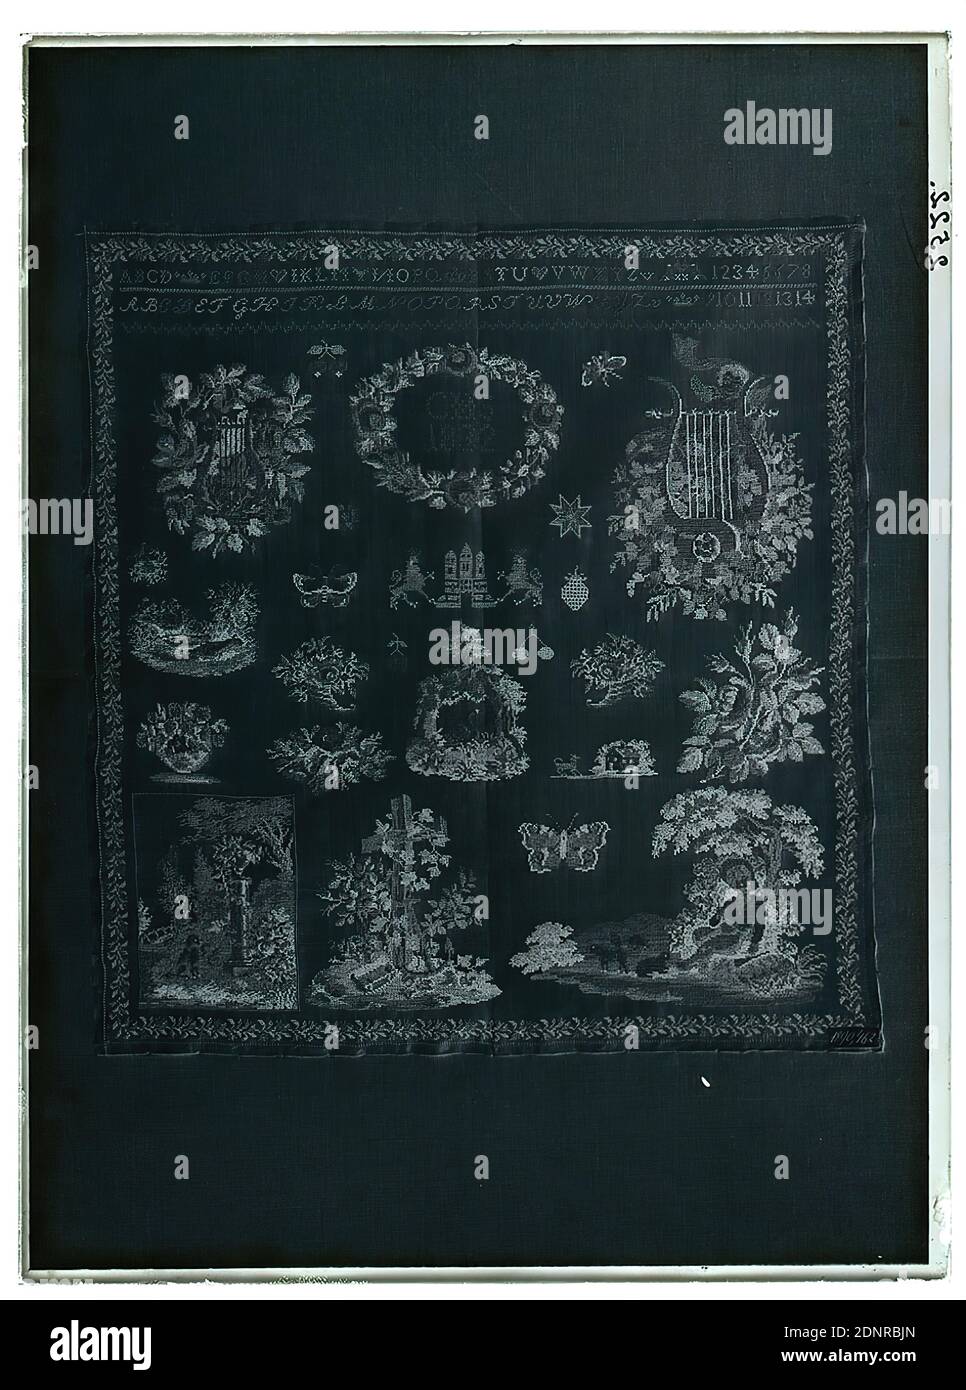 Wilhelm Weimar, sampler, glass negative, black and white negative process, total: height: 23,8 cm; width: 17,8 cm, numbered: right: in black ink: 2522nd, work of applied arts (textiles), ornaments, letters, alphabet, writing, number, flower ornaments, plant ornaments, cupids with attributes of arts, sciences etc, butterfly, cherry, musical instruments, cornucopia, coat of arms (state symbol Stock Photo